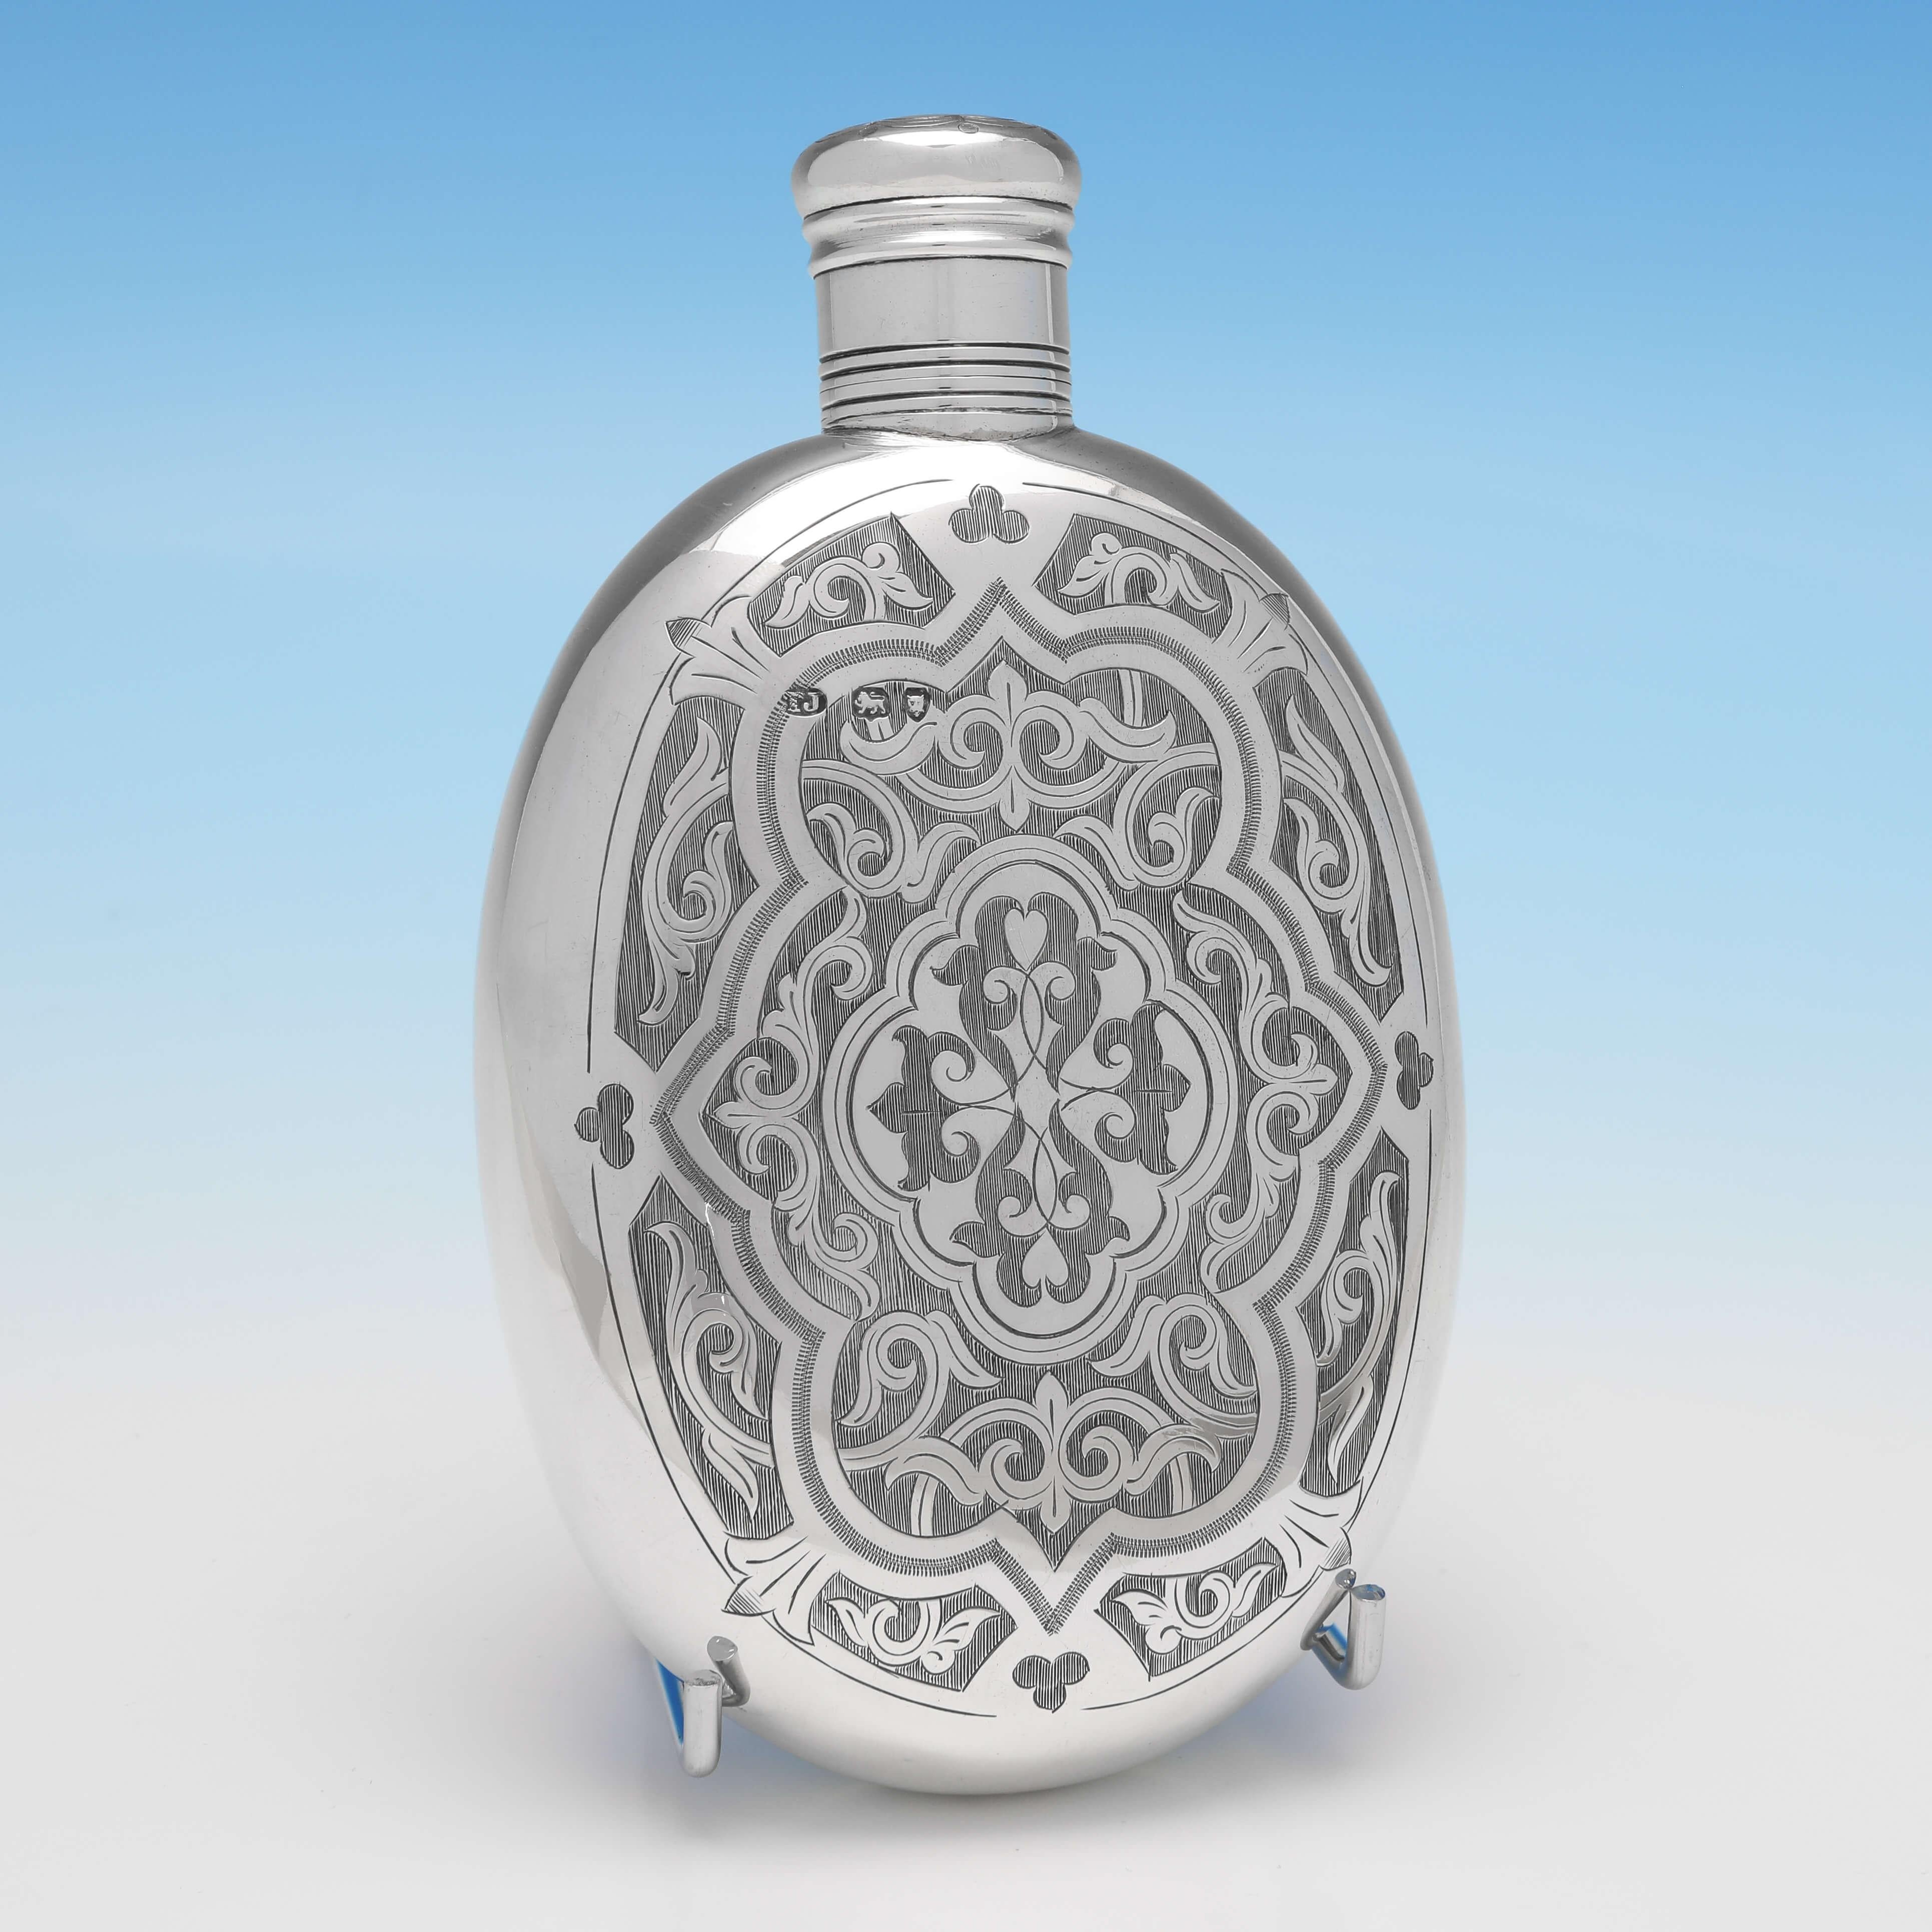 Hallmarked in London in 1875 by Thomas Johnson, this striking, Victorian, antique sterling silver hip flask, is oval in shape, and features wonderful gothic revival engraving, and a removable lid. The hip flask measures 6